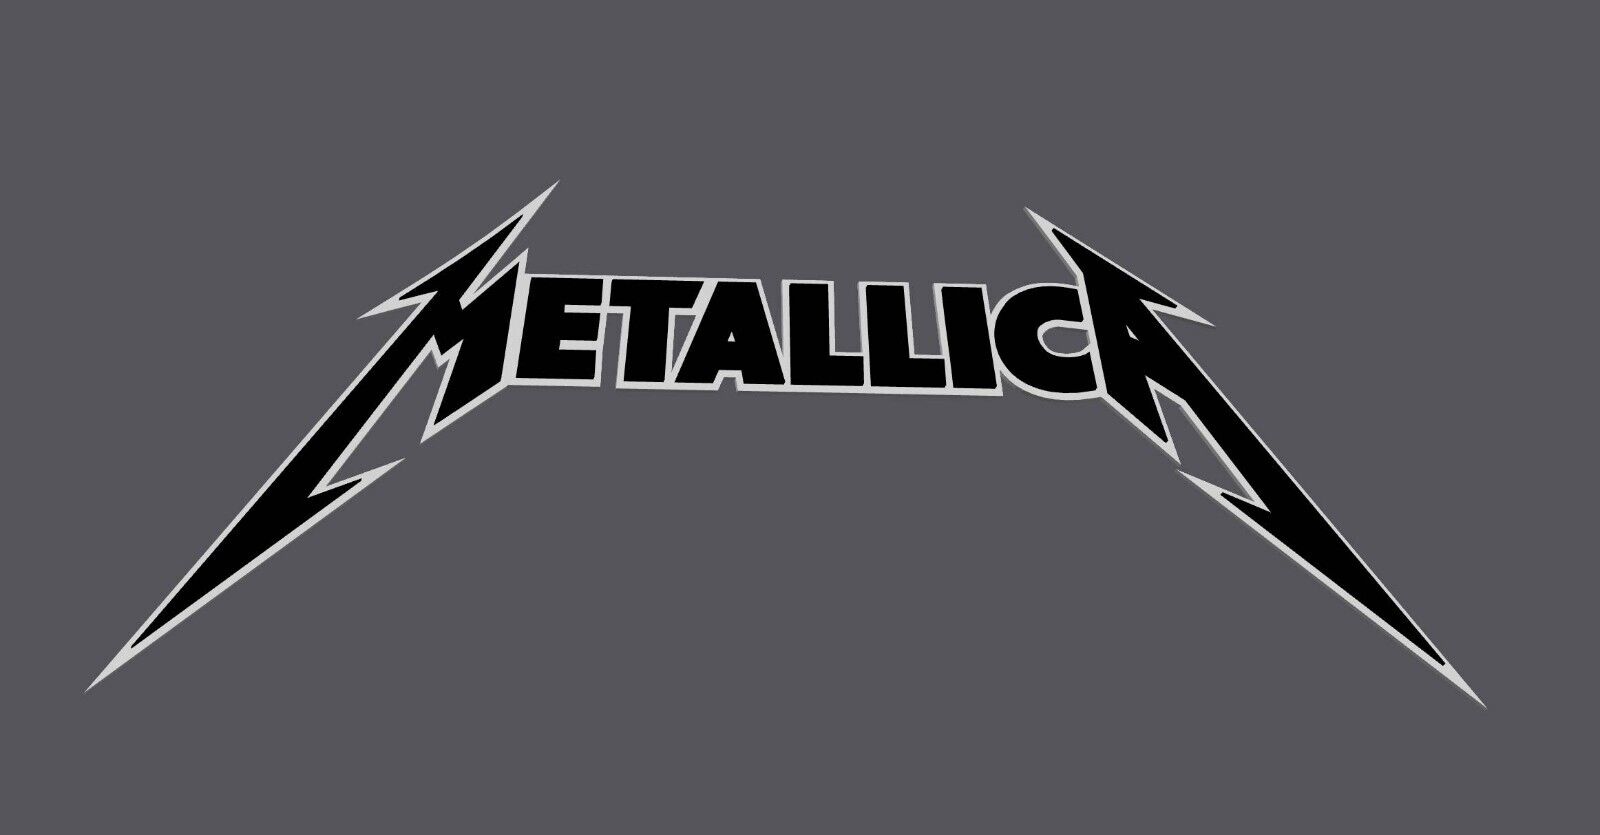 Metallica inspired 3D Printed Logo Plaque, Wall Art, Man Cave, Music Lovers 9.5